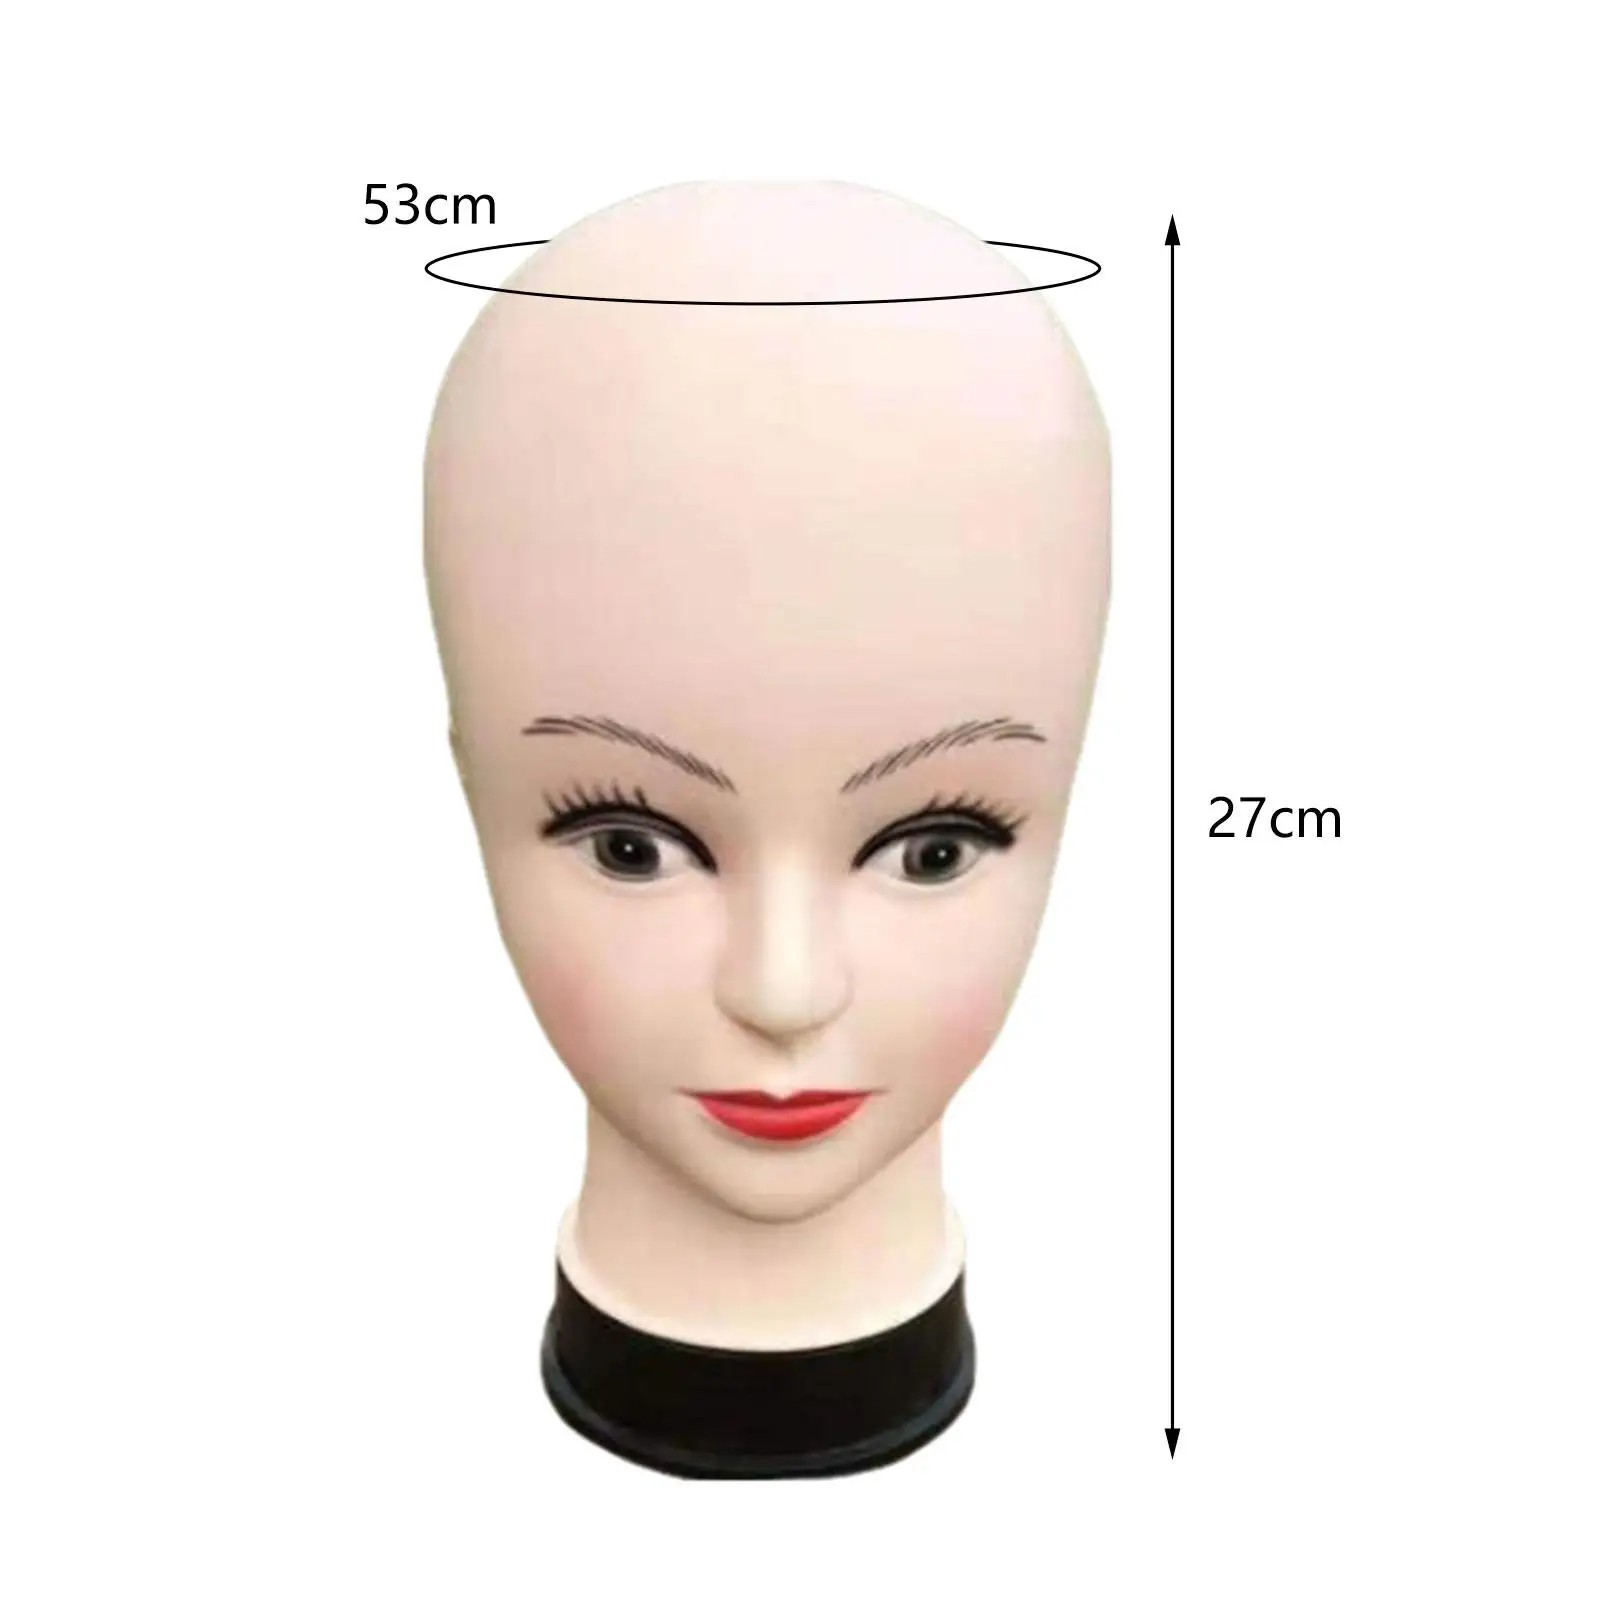 Bald Female Mannequin Head Model for Hair Styling Wig Making and Display Cap